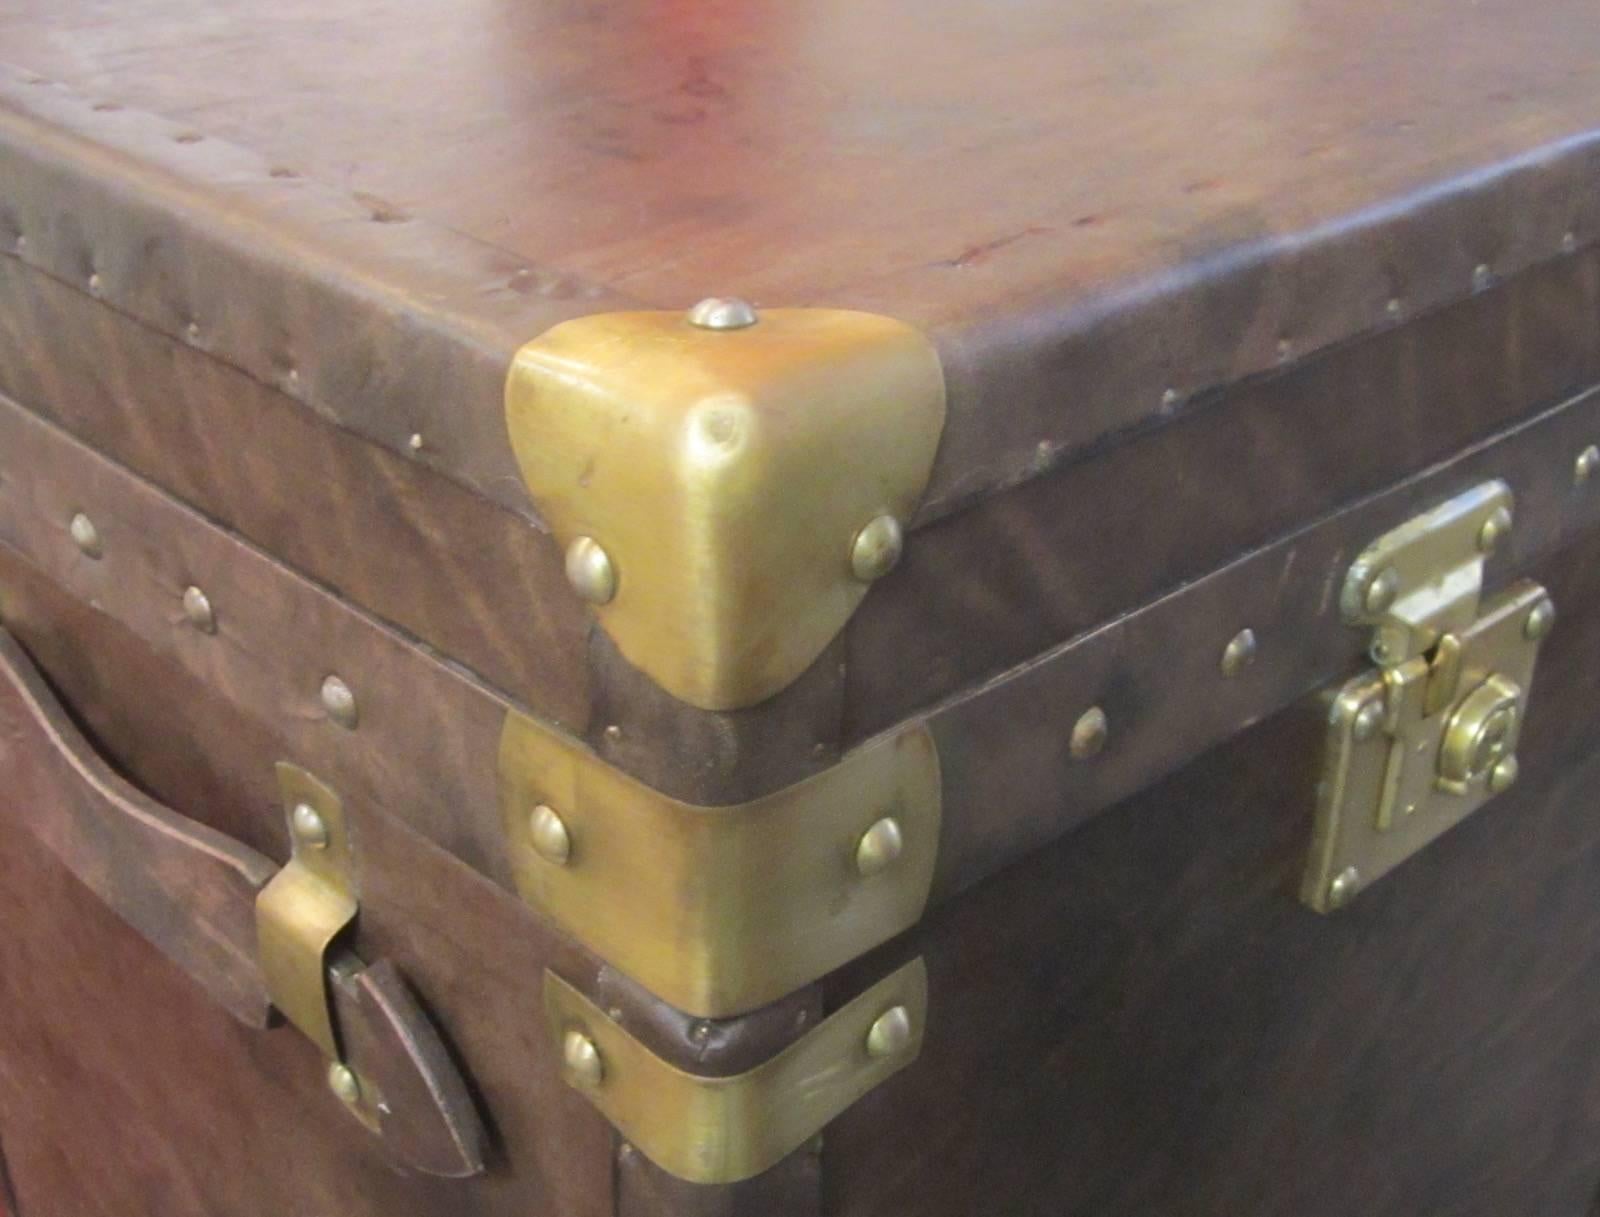 Pair of English leather brass bound Victorian period style Officer's trunks,
Measures: 45 x 41 x 57cm high.